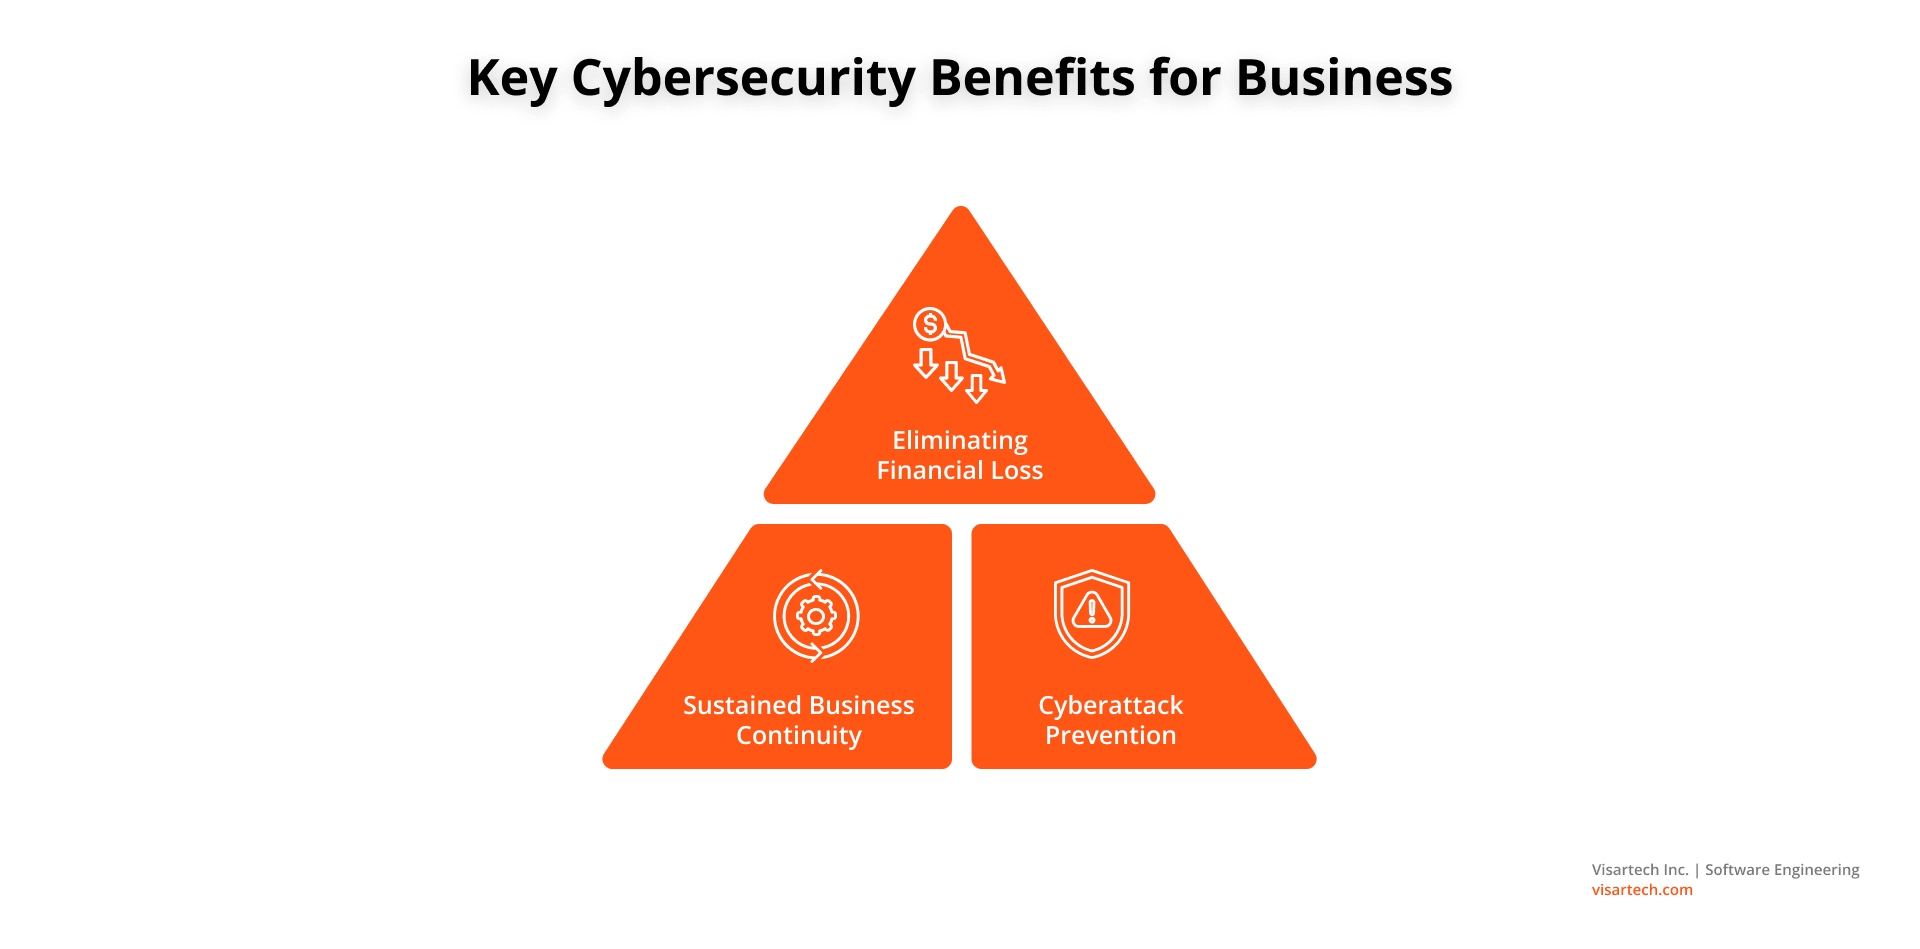 Key Cybersecurity Benefits for Business - Visartech Blog